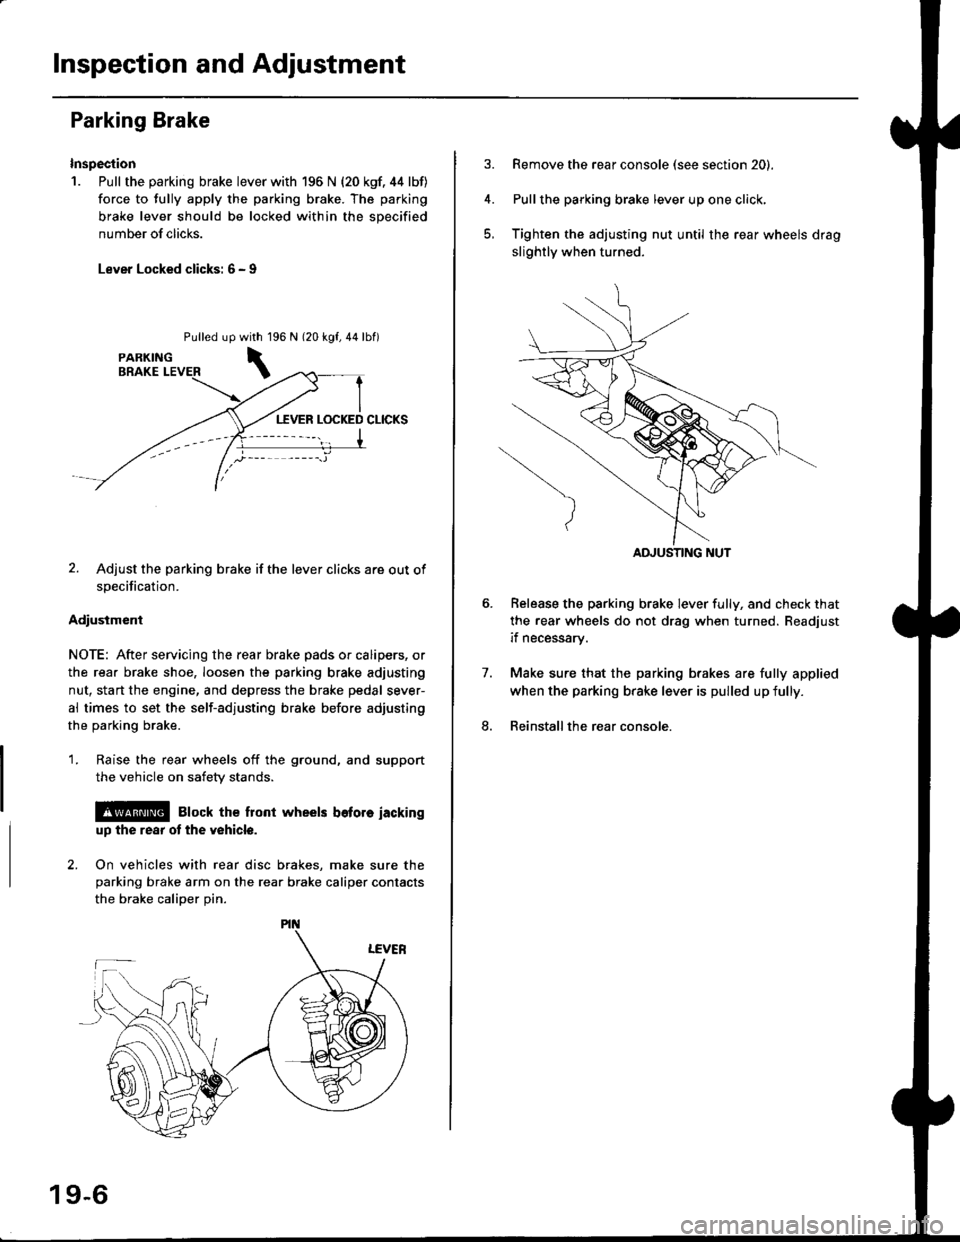 HONDA CIVIC 1999 6.G Workshop Manual Inspection and Adjustment
Parking Brake
Inspection
1. Pull the parking brake lever with 196 N {20 kgf. 44 lbf)
force to fully apply the parking brake. The parking
brake lever should be locked within t